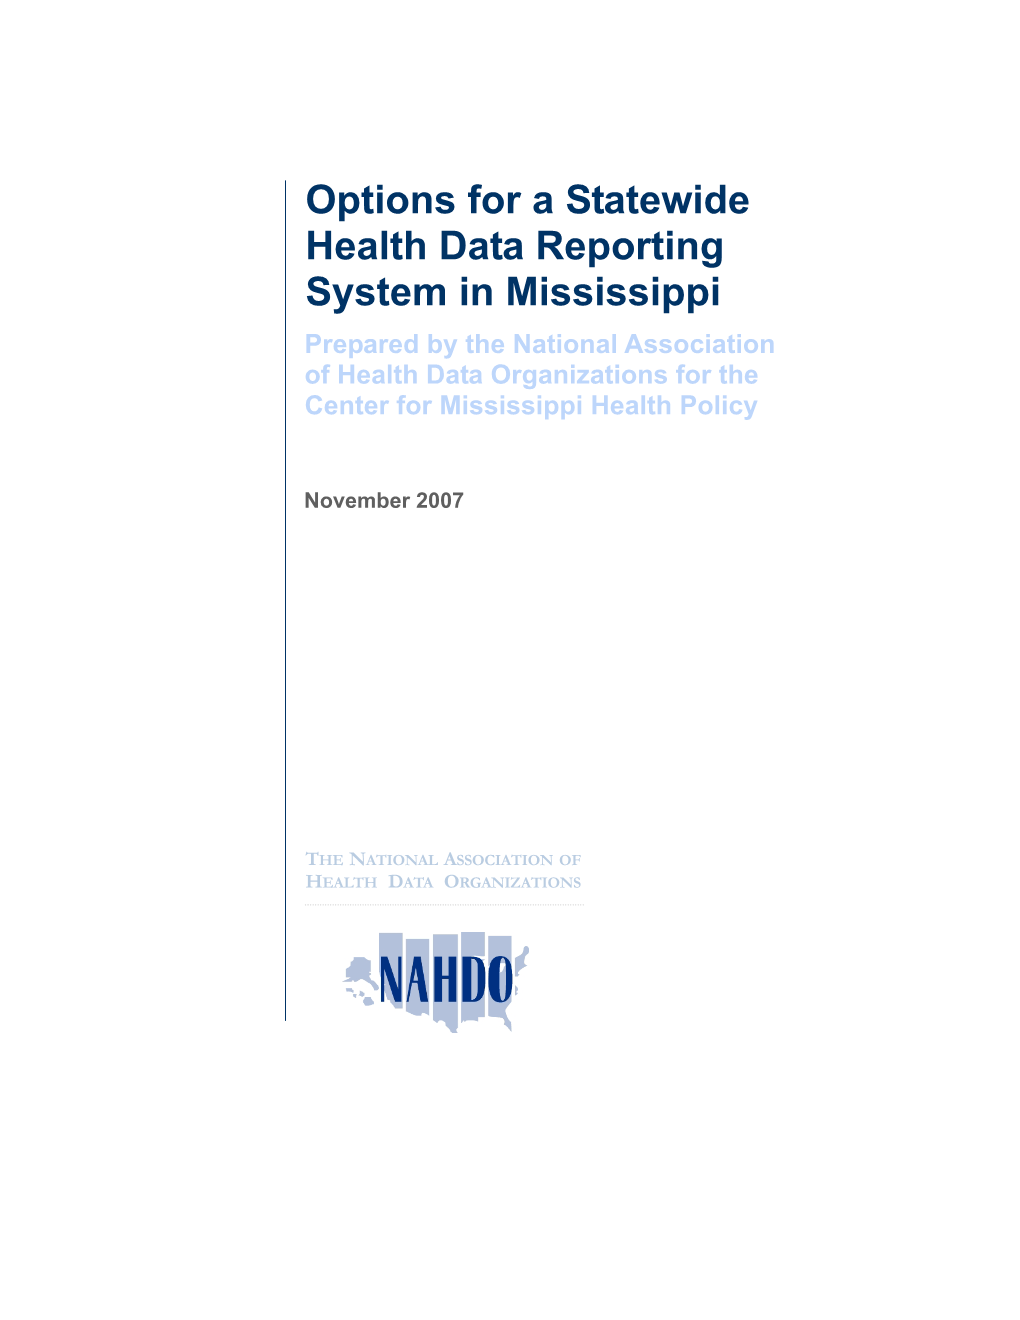 Options for a Statewide Health Data Reporting System in Mississippi